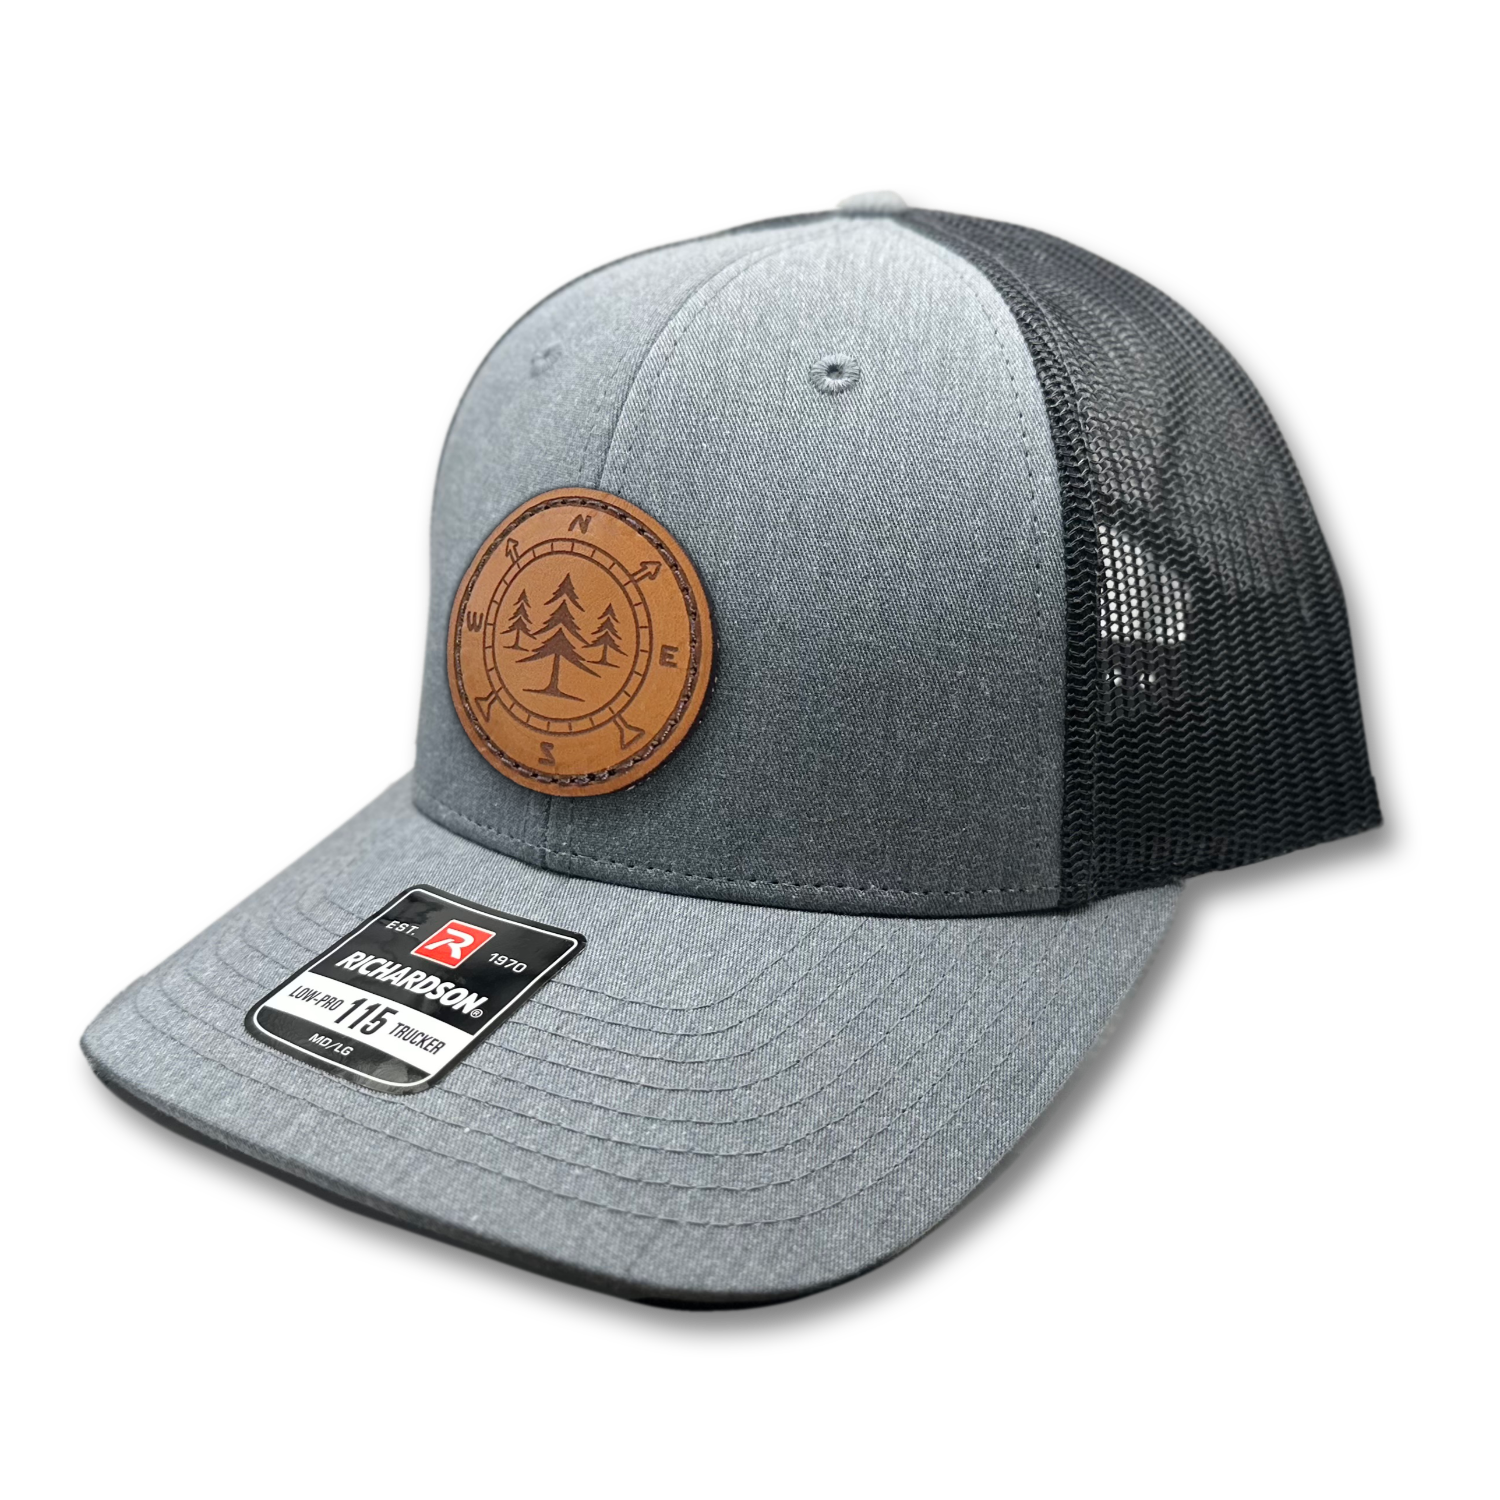 A high-quality leather patch hat named Lost Pines, showcasing a distinctive compass and pine trees design on a circular leather patch. Made in the USA, this hat features genuine leather craftsmanship and is affixed to a Heather grey/charcoal Richardson 115 low profile SnapBack hat. Available in small and m/l sizes and various colors, this unique hat is inspired by the picturesque mountains of Colorado. Perfect for hat enthusiasts and those seeking stylish leather patch designs.